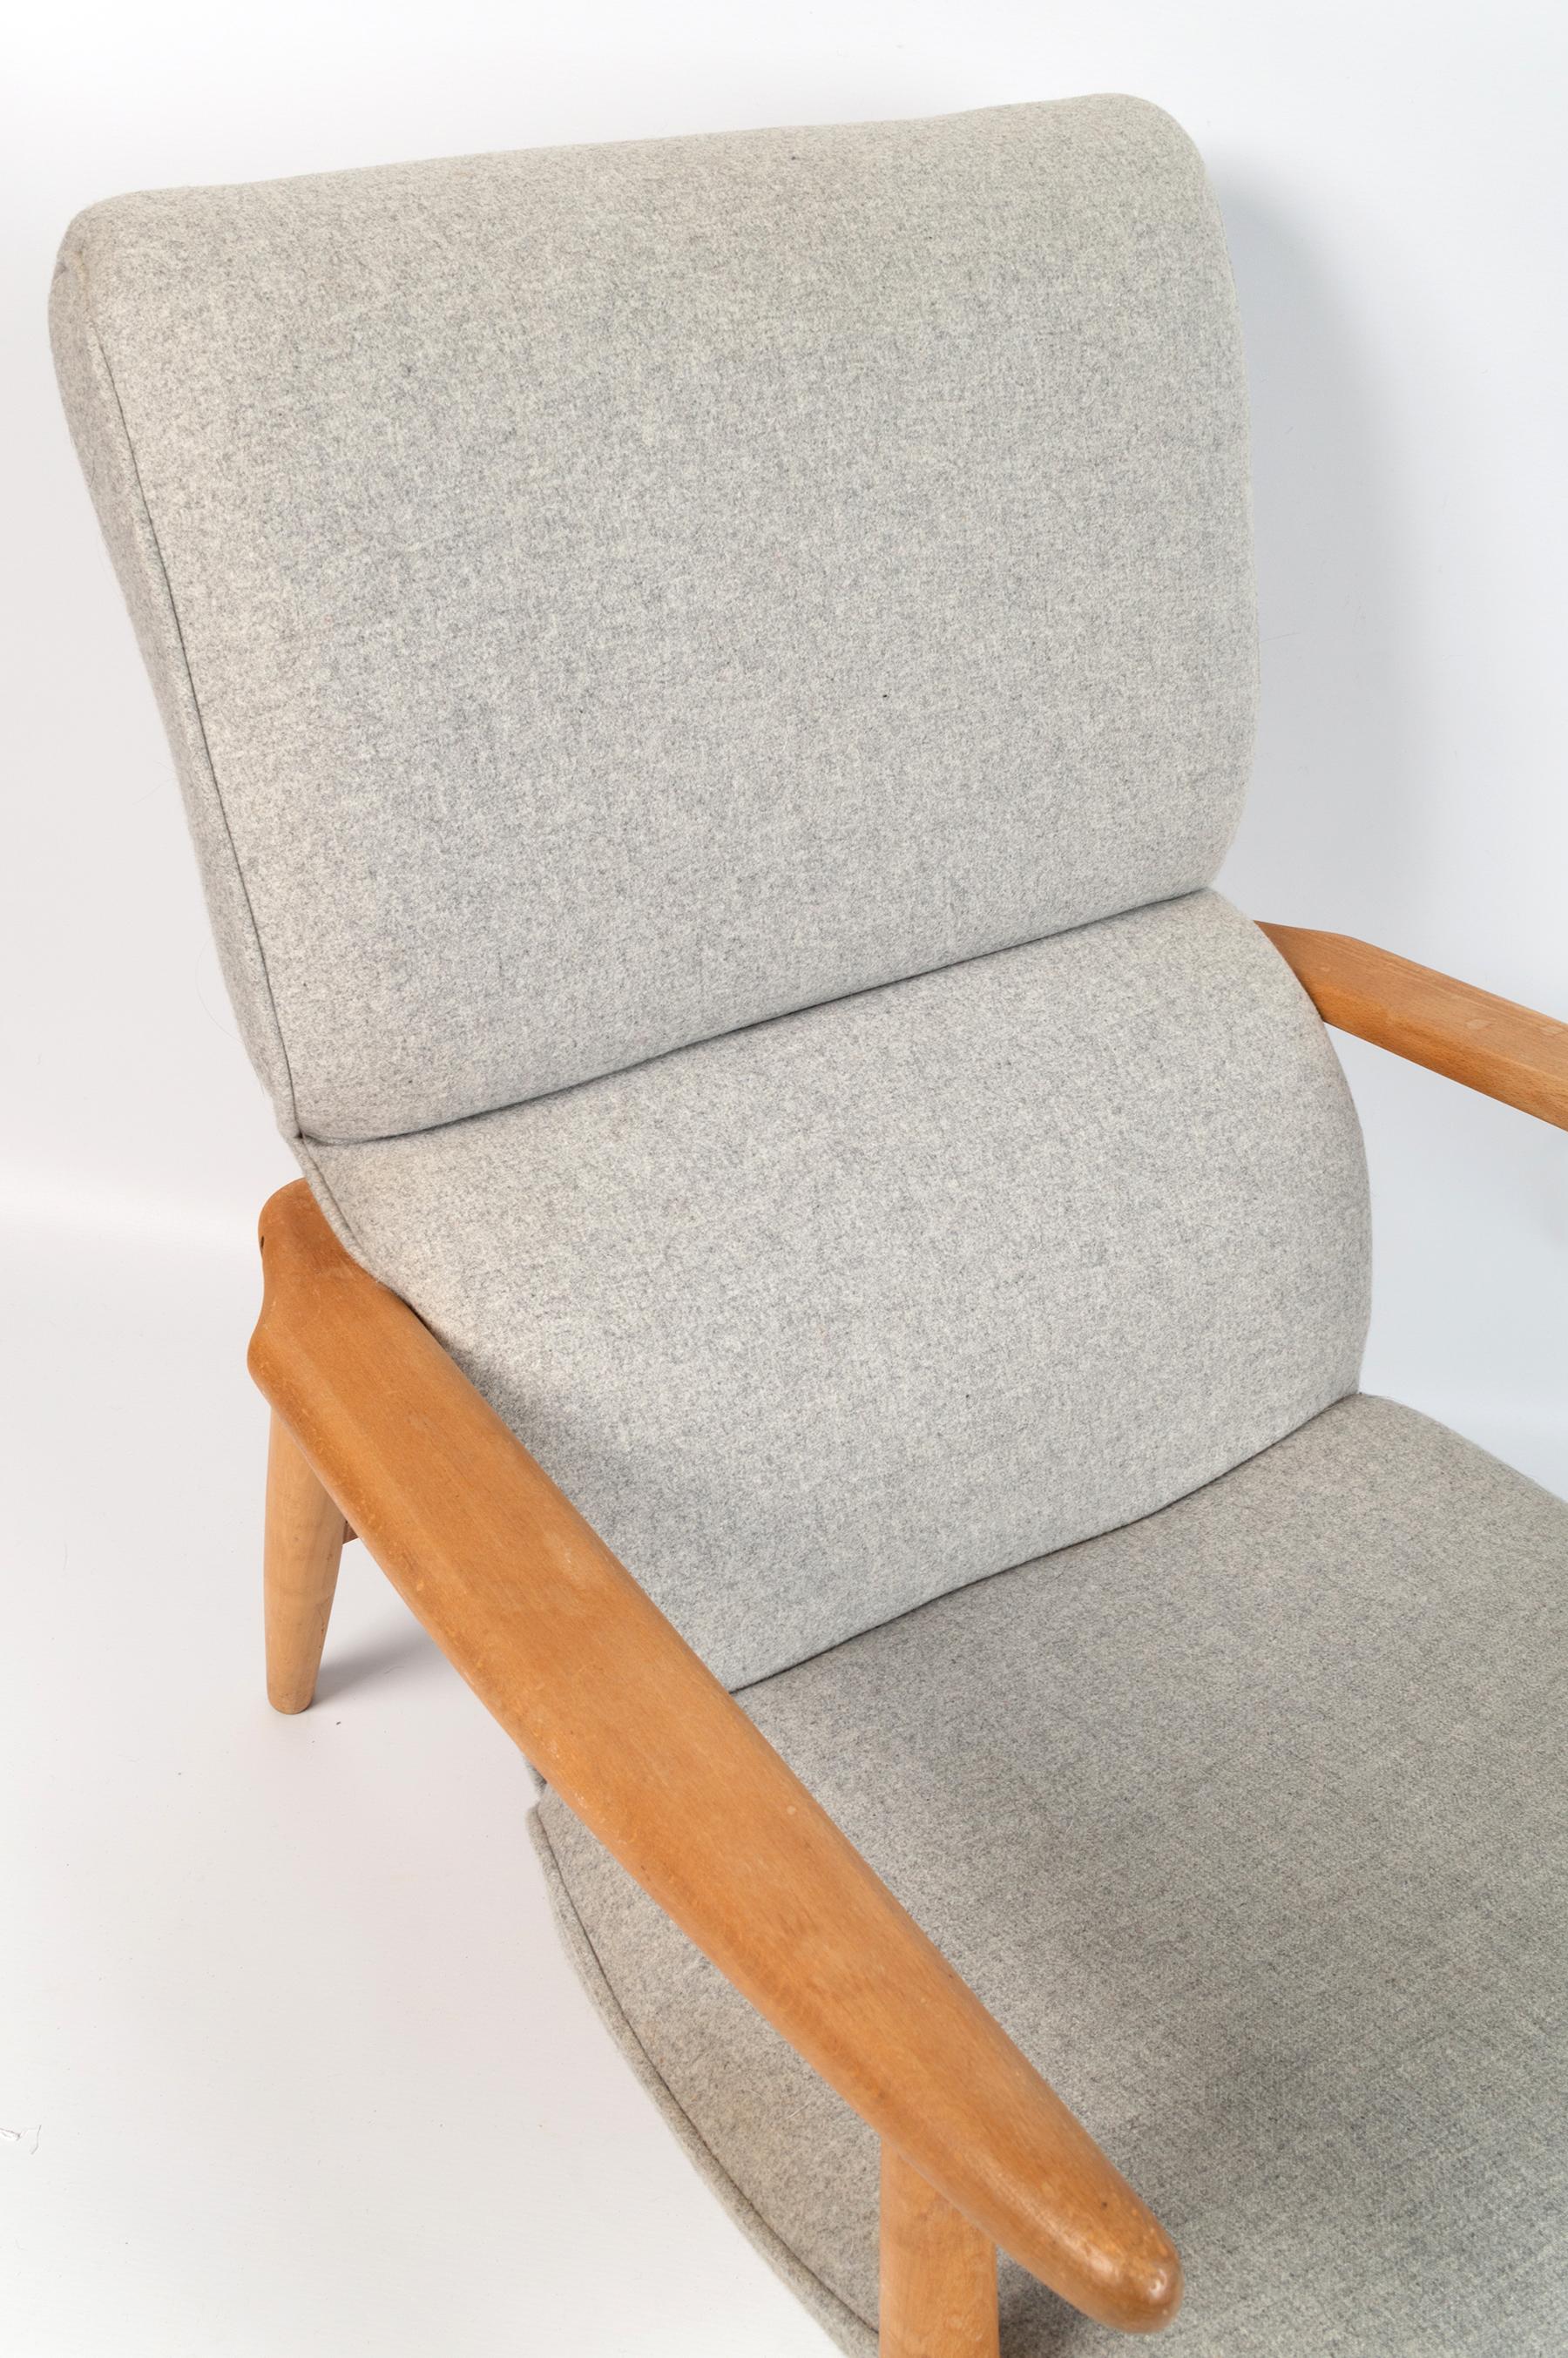 Beech Pair of Mid-Century Danish Lounge Chairs Armchairs Denmark, C.1950 For Sale